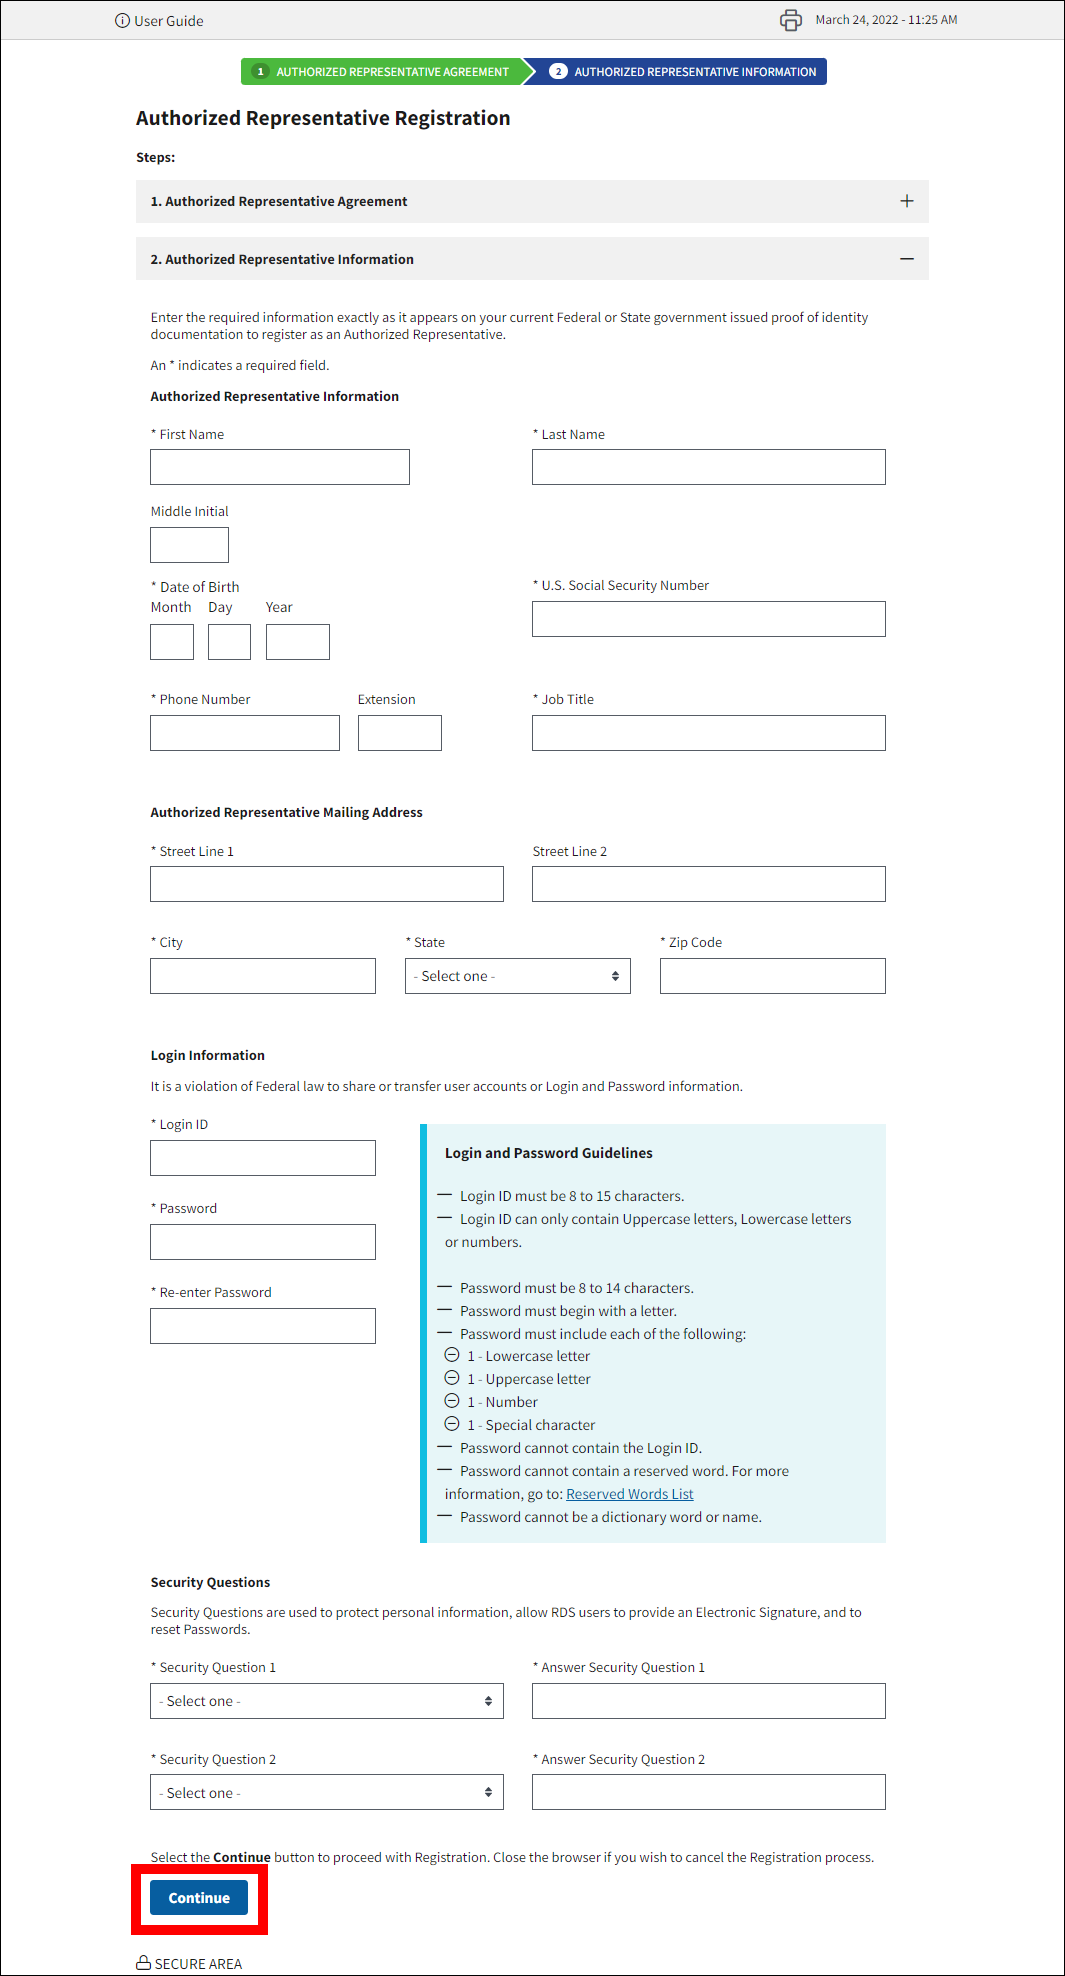 Authorized Representative Registration page with Continue button highlighted.